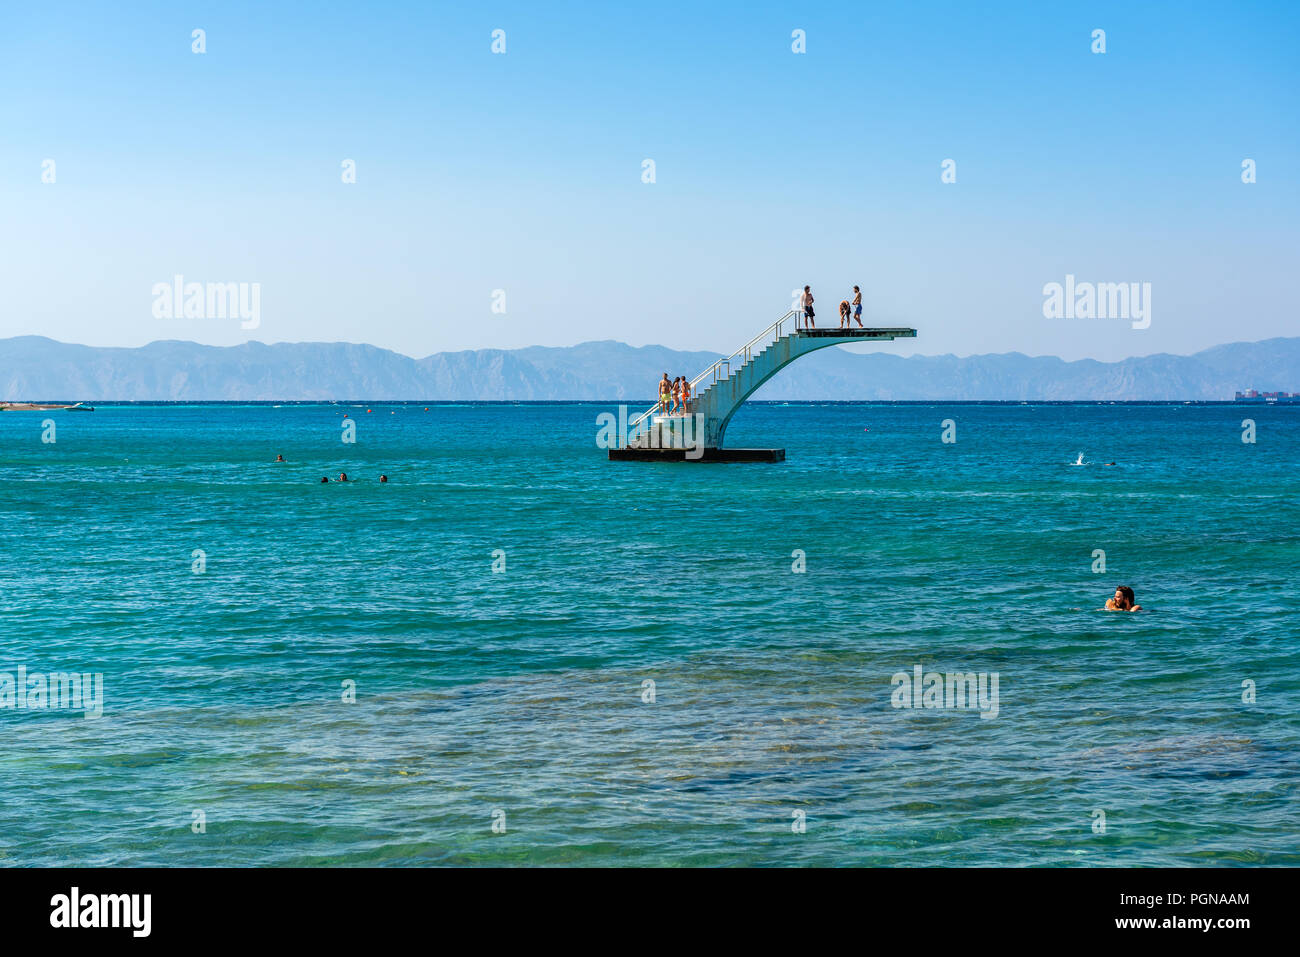 RHODES, GREECE - May 13, 2018: Young people on a sea diving platform. Elli beach, the main beach of Rhodes town. Greece Stock Photo